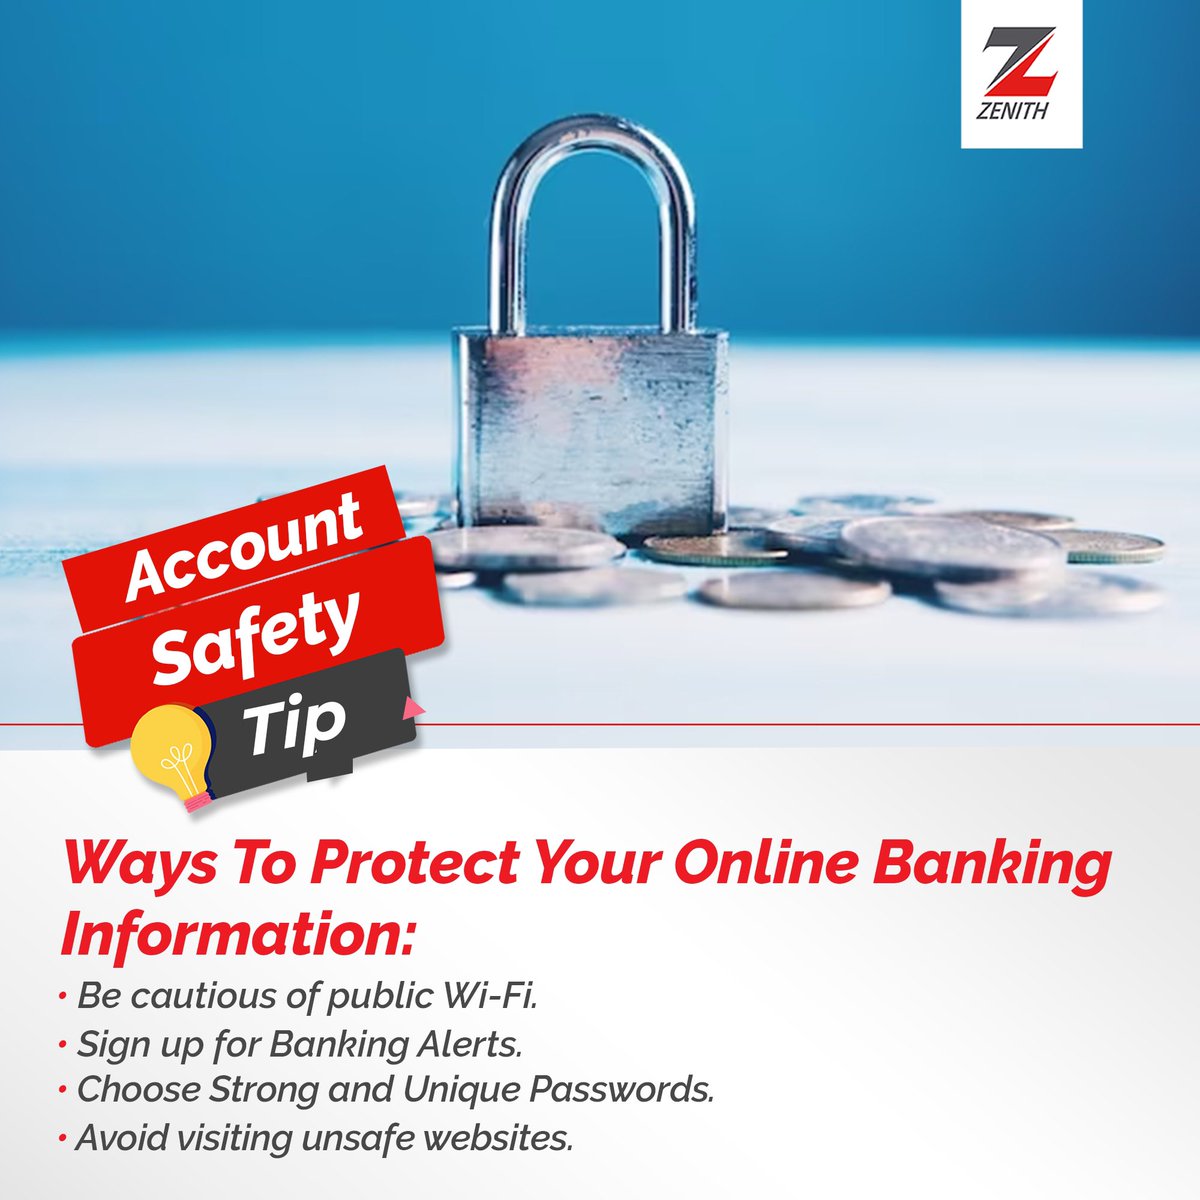 Bank safe. 

Do not make it easy for hackers to access your confidential information.

#cybersecurity #safebanking #internetbanking #onlinebanking